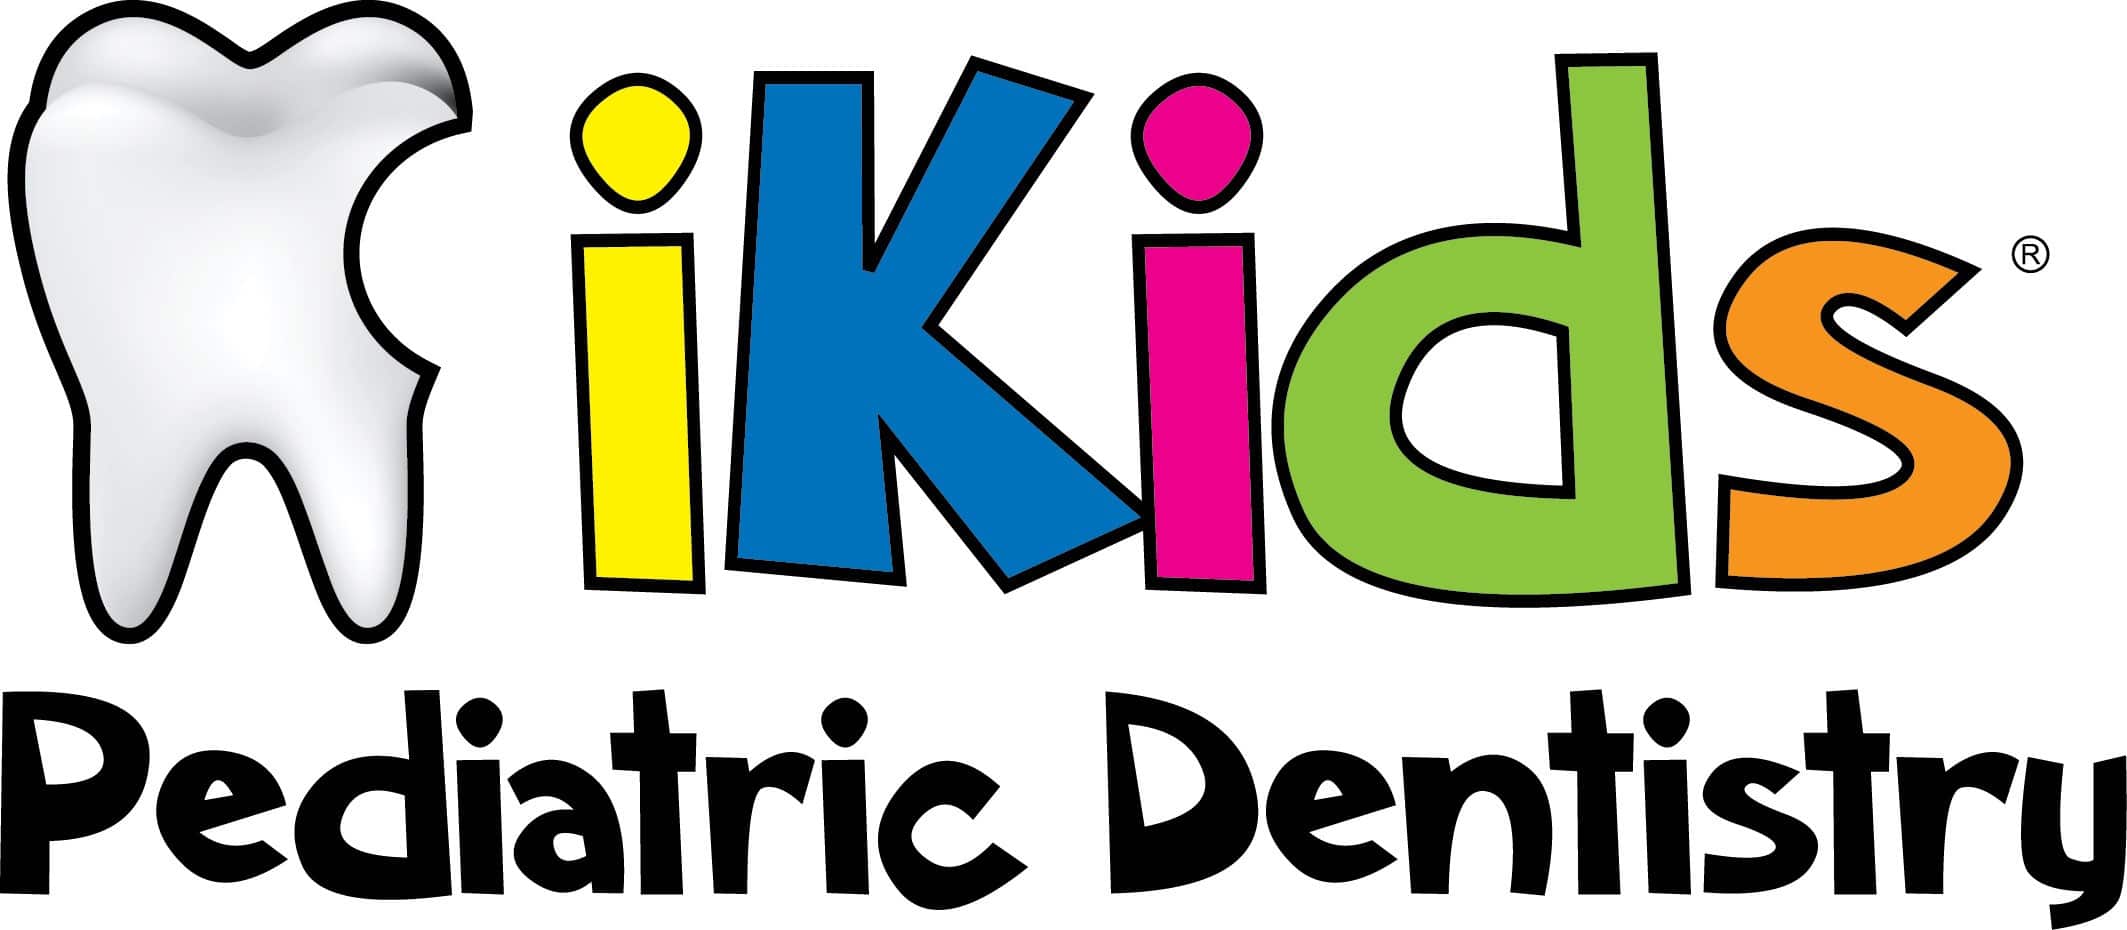 Ennis Ikids Pediatric Dentistry And